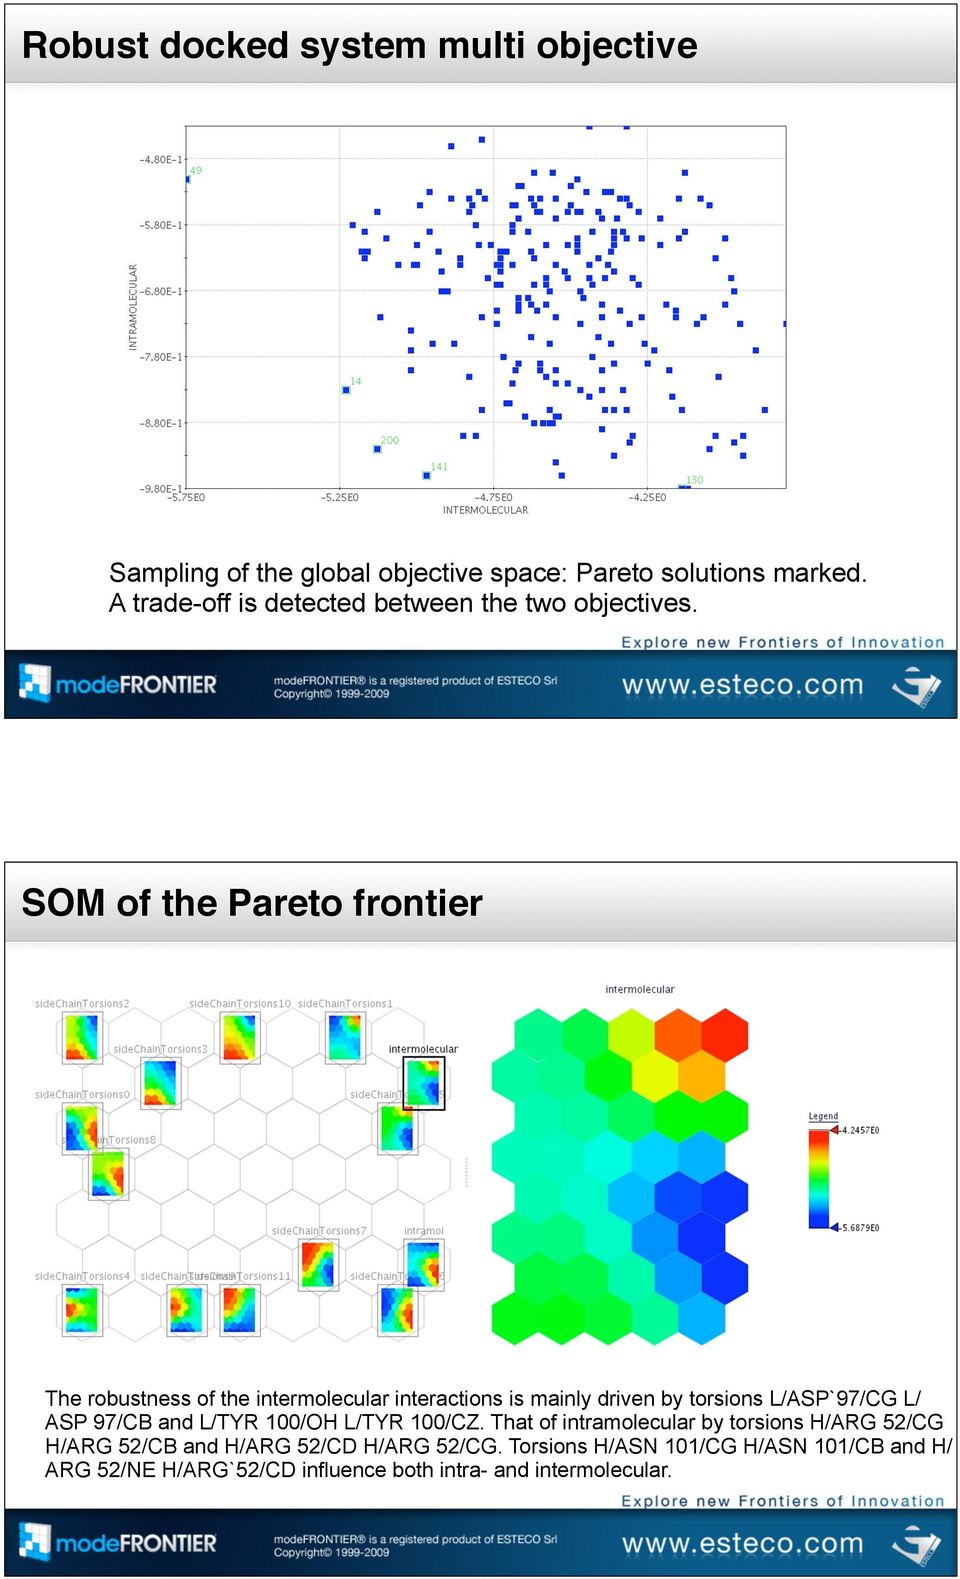 SOM of the Pareto frontier The robustness of the intermolecular interactions is mainly driven by torsions L/ASP`97/CG L/ ASP